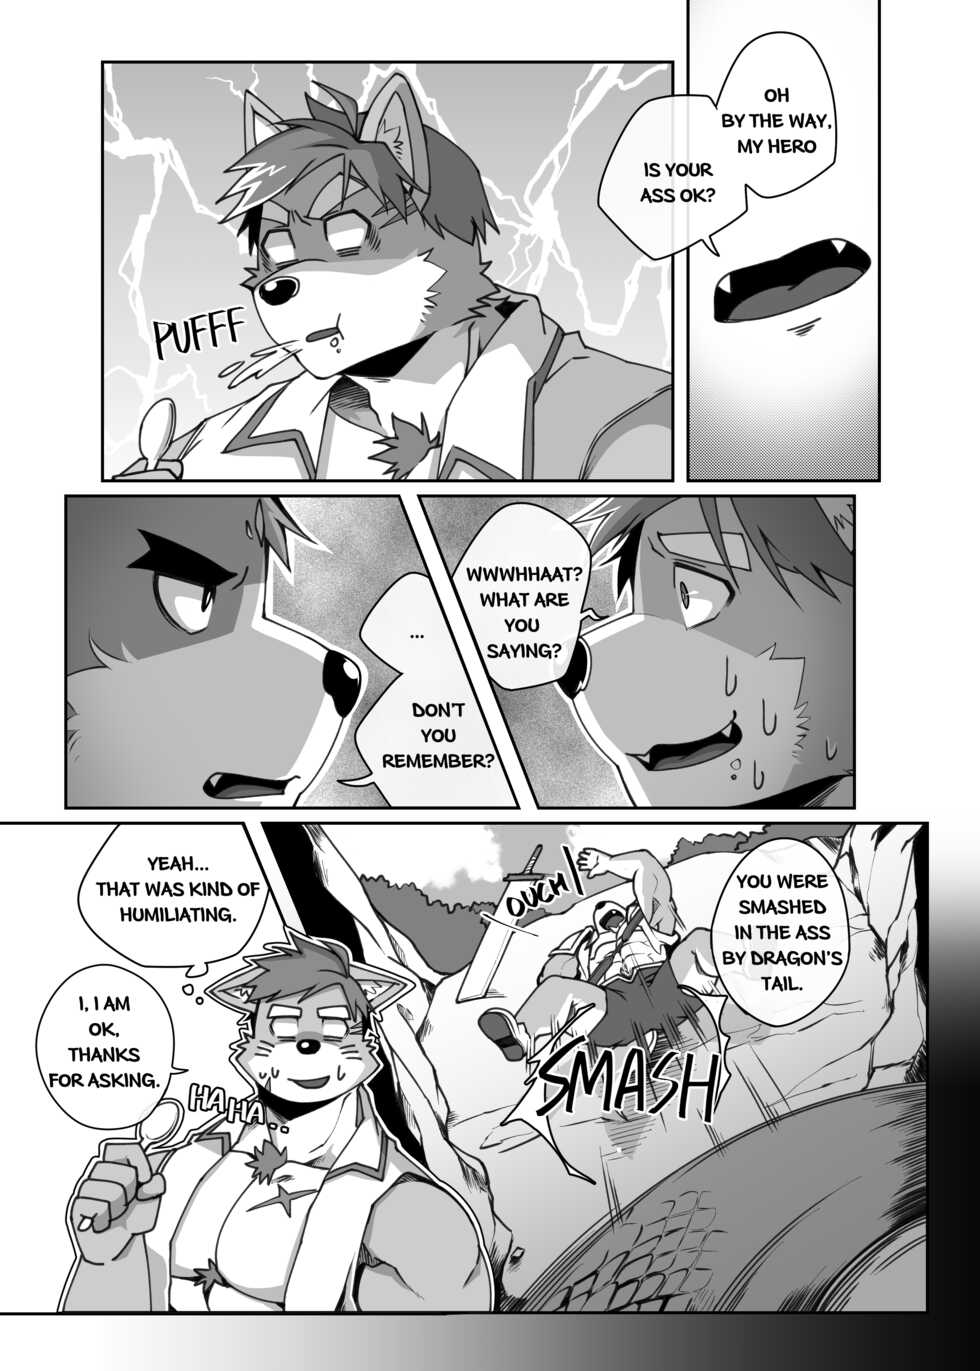 [MIKKY] Hero's Deepest Secret EP1 [English] [Decensored] - Page 8